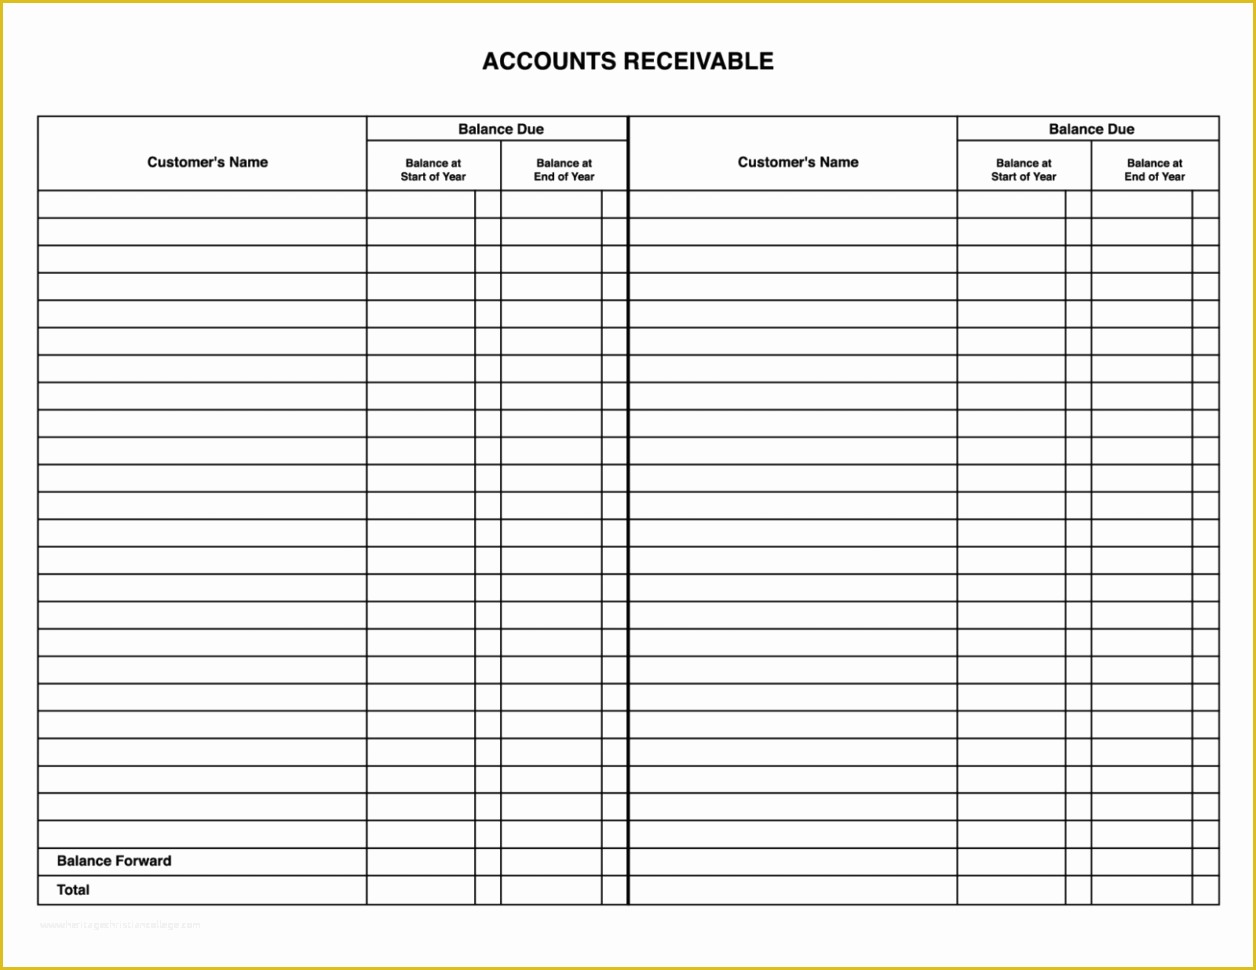 Free Accounting Spreadsheet Templates for Small Business Of Free Accounting Spreadsheet Templates for Small Business